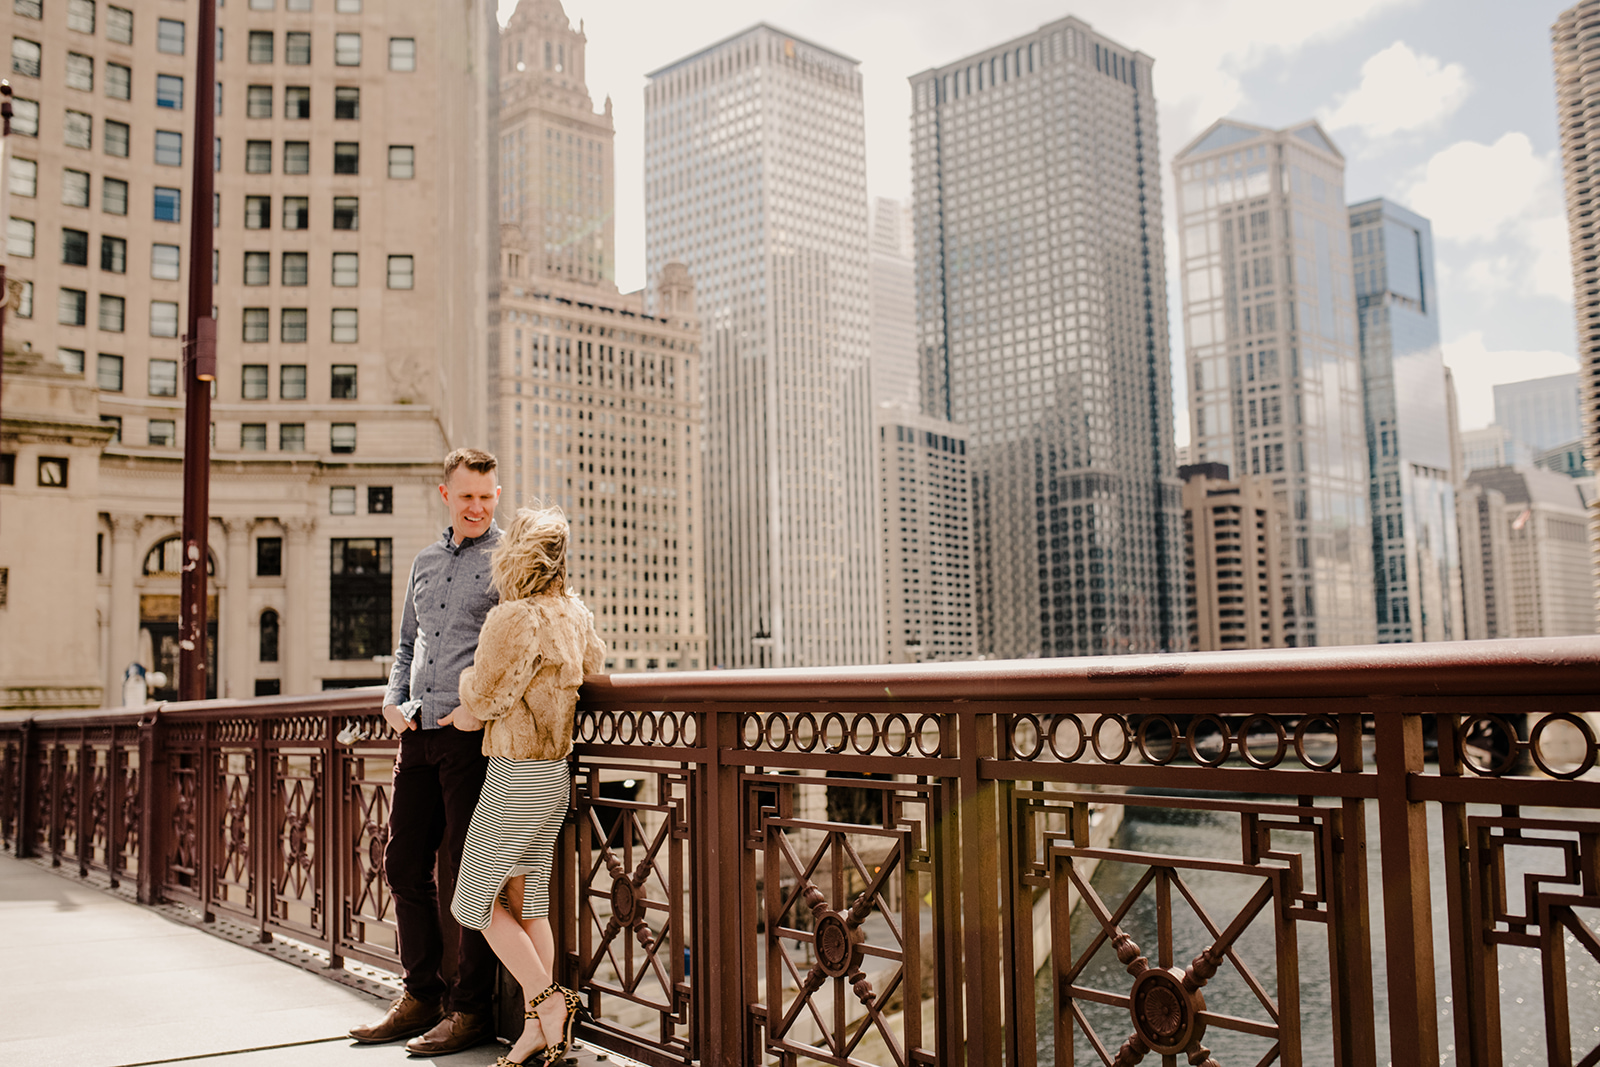 Exploring the beauty of downtown Chicago with Stills by Hernan
